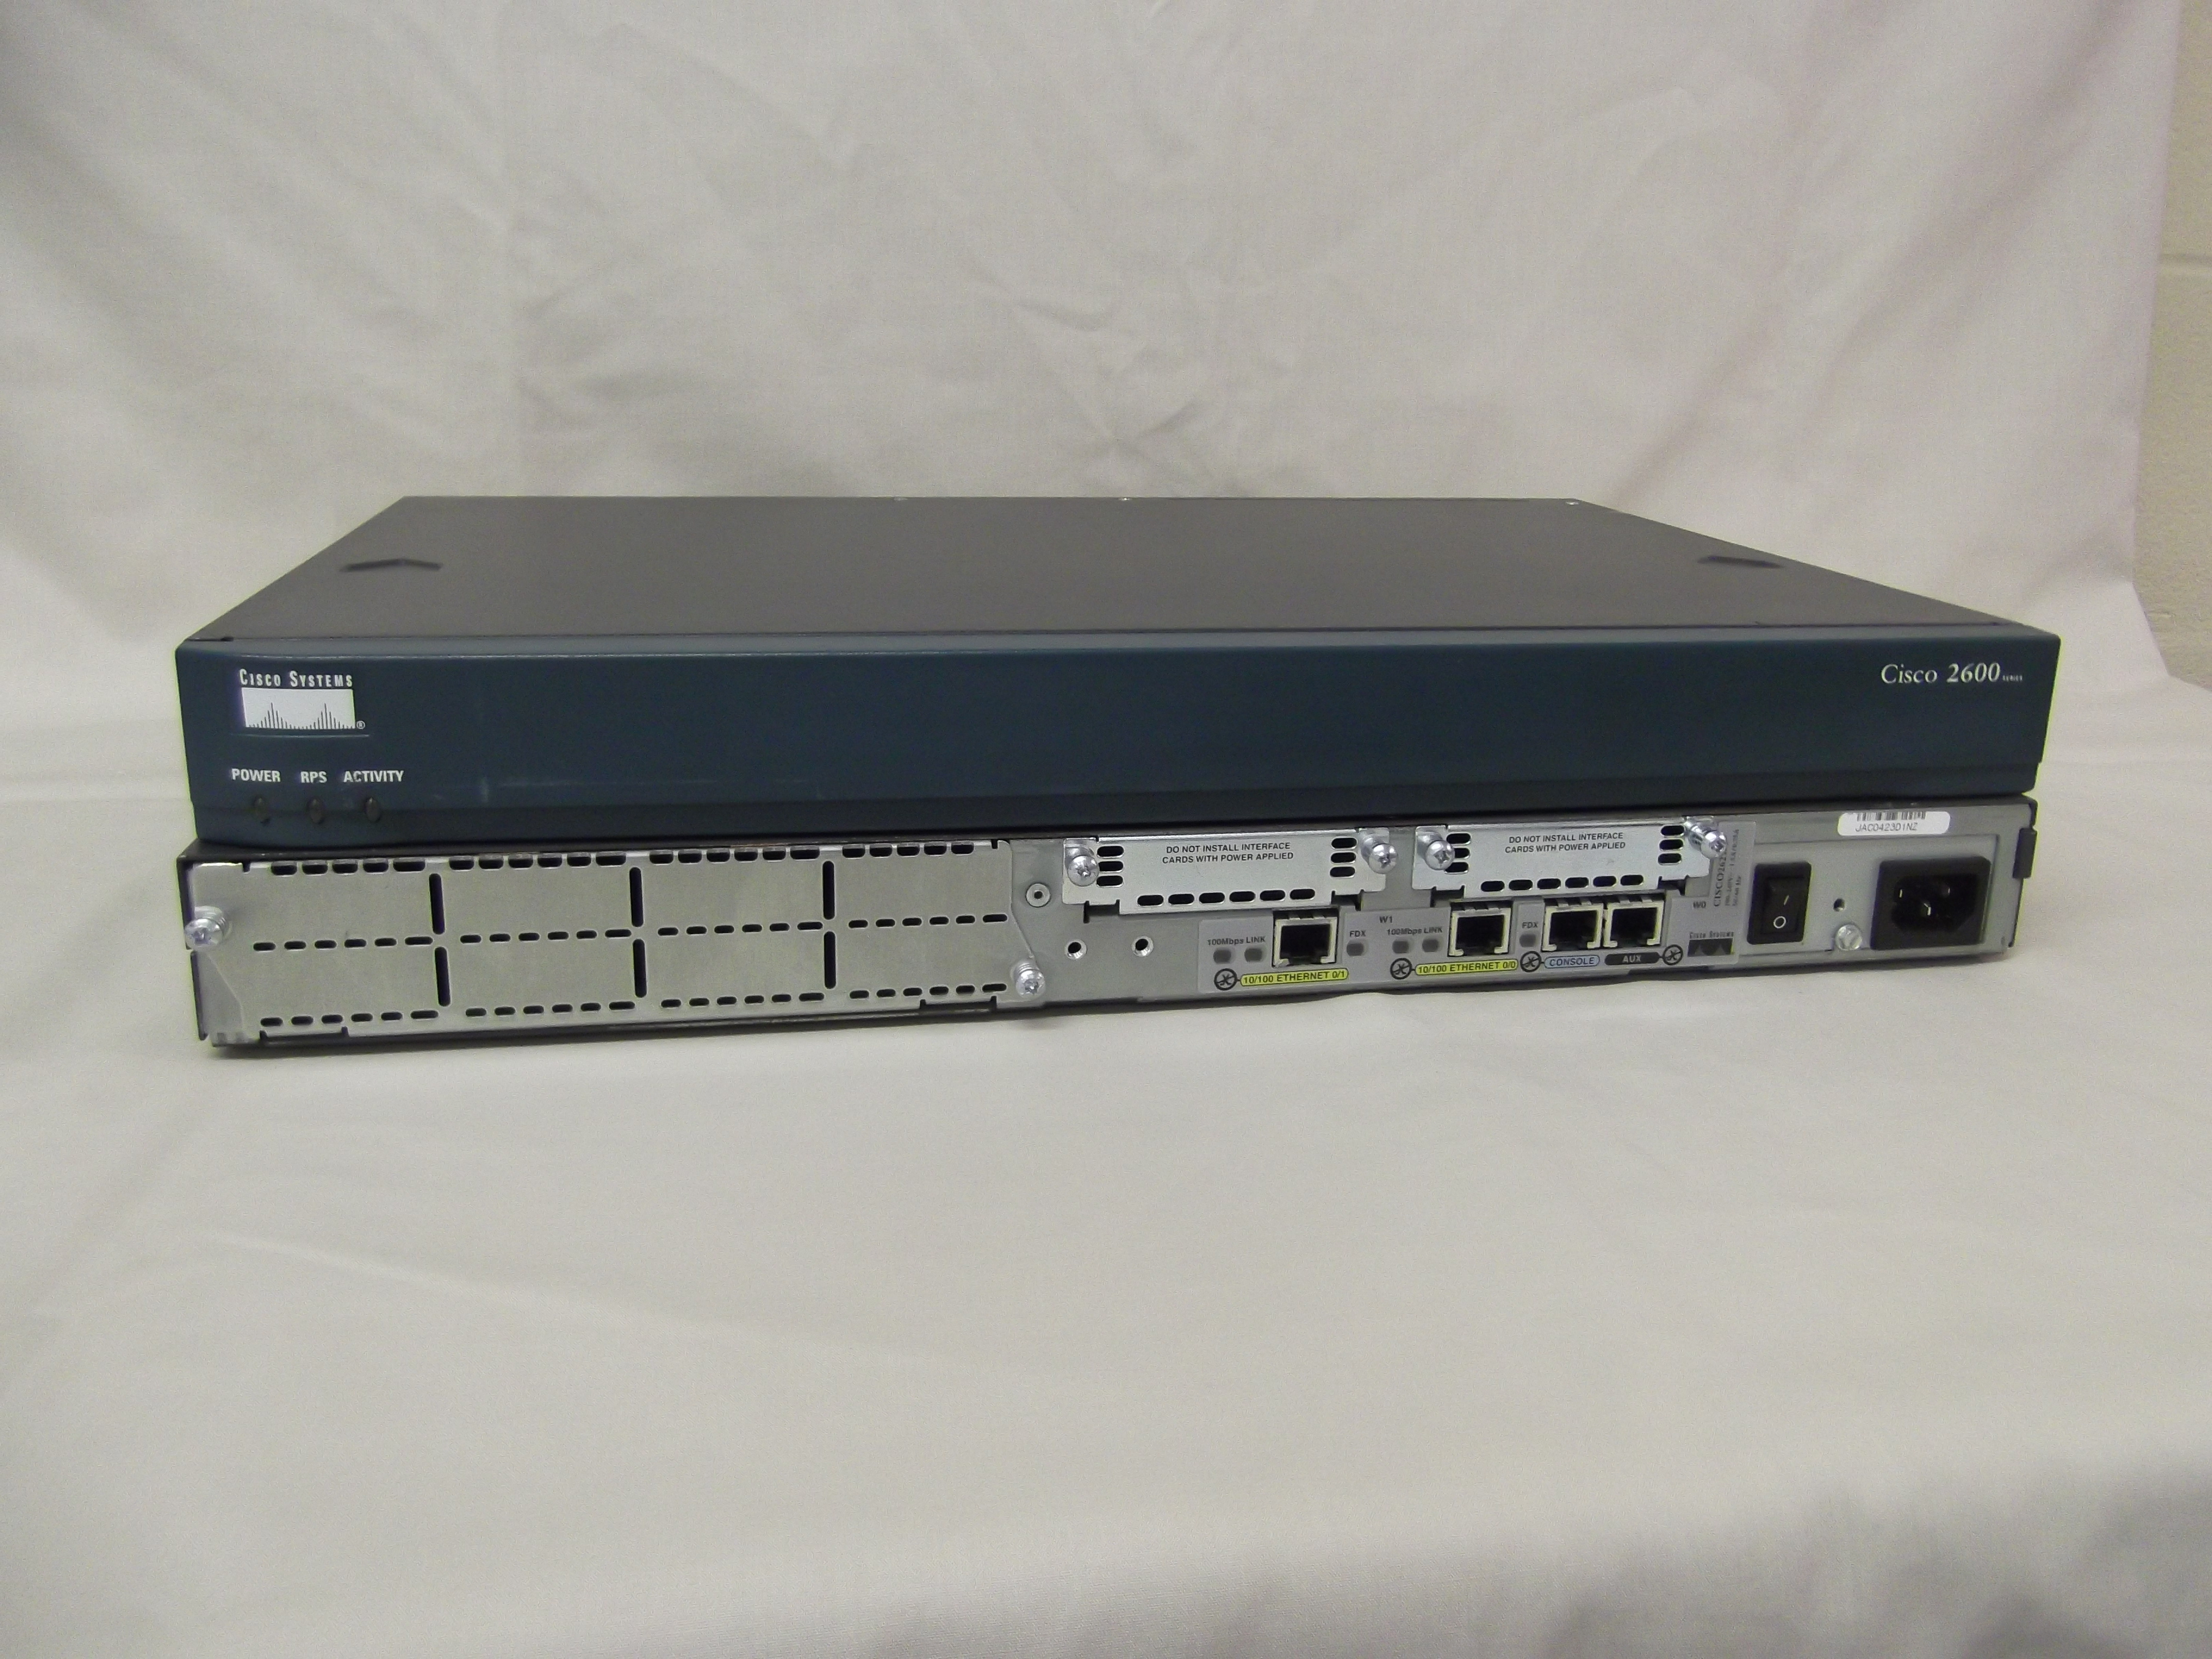 Cisco 2611 Dual ethernet router with 2 WIC slots and 1 NM slot 